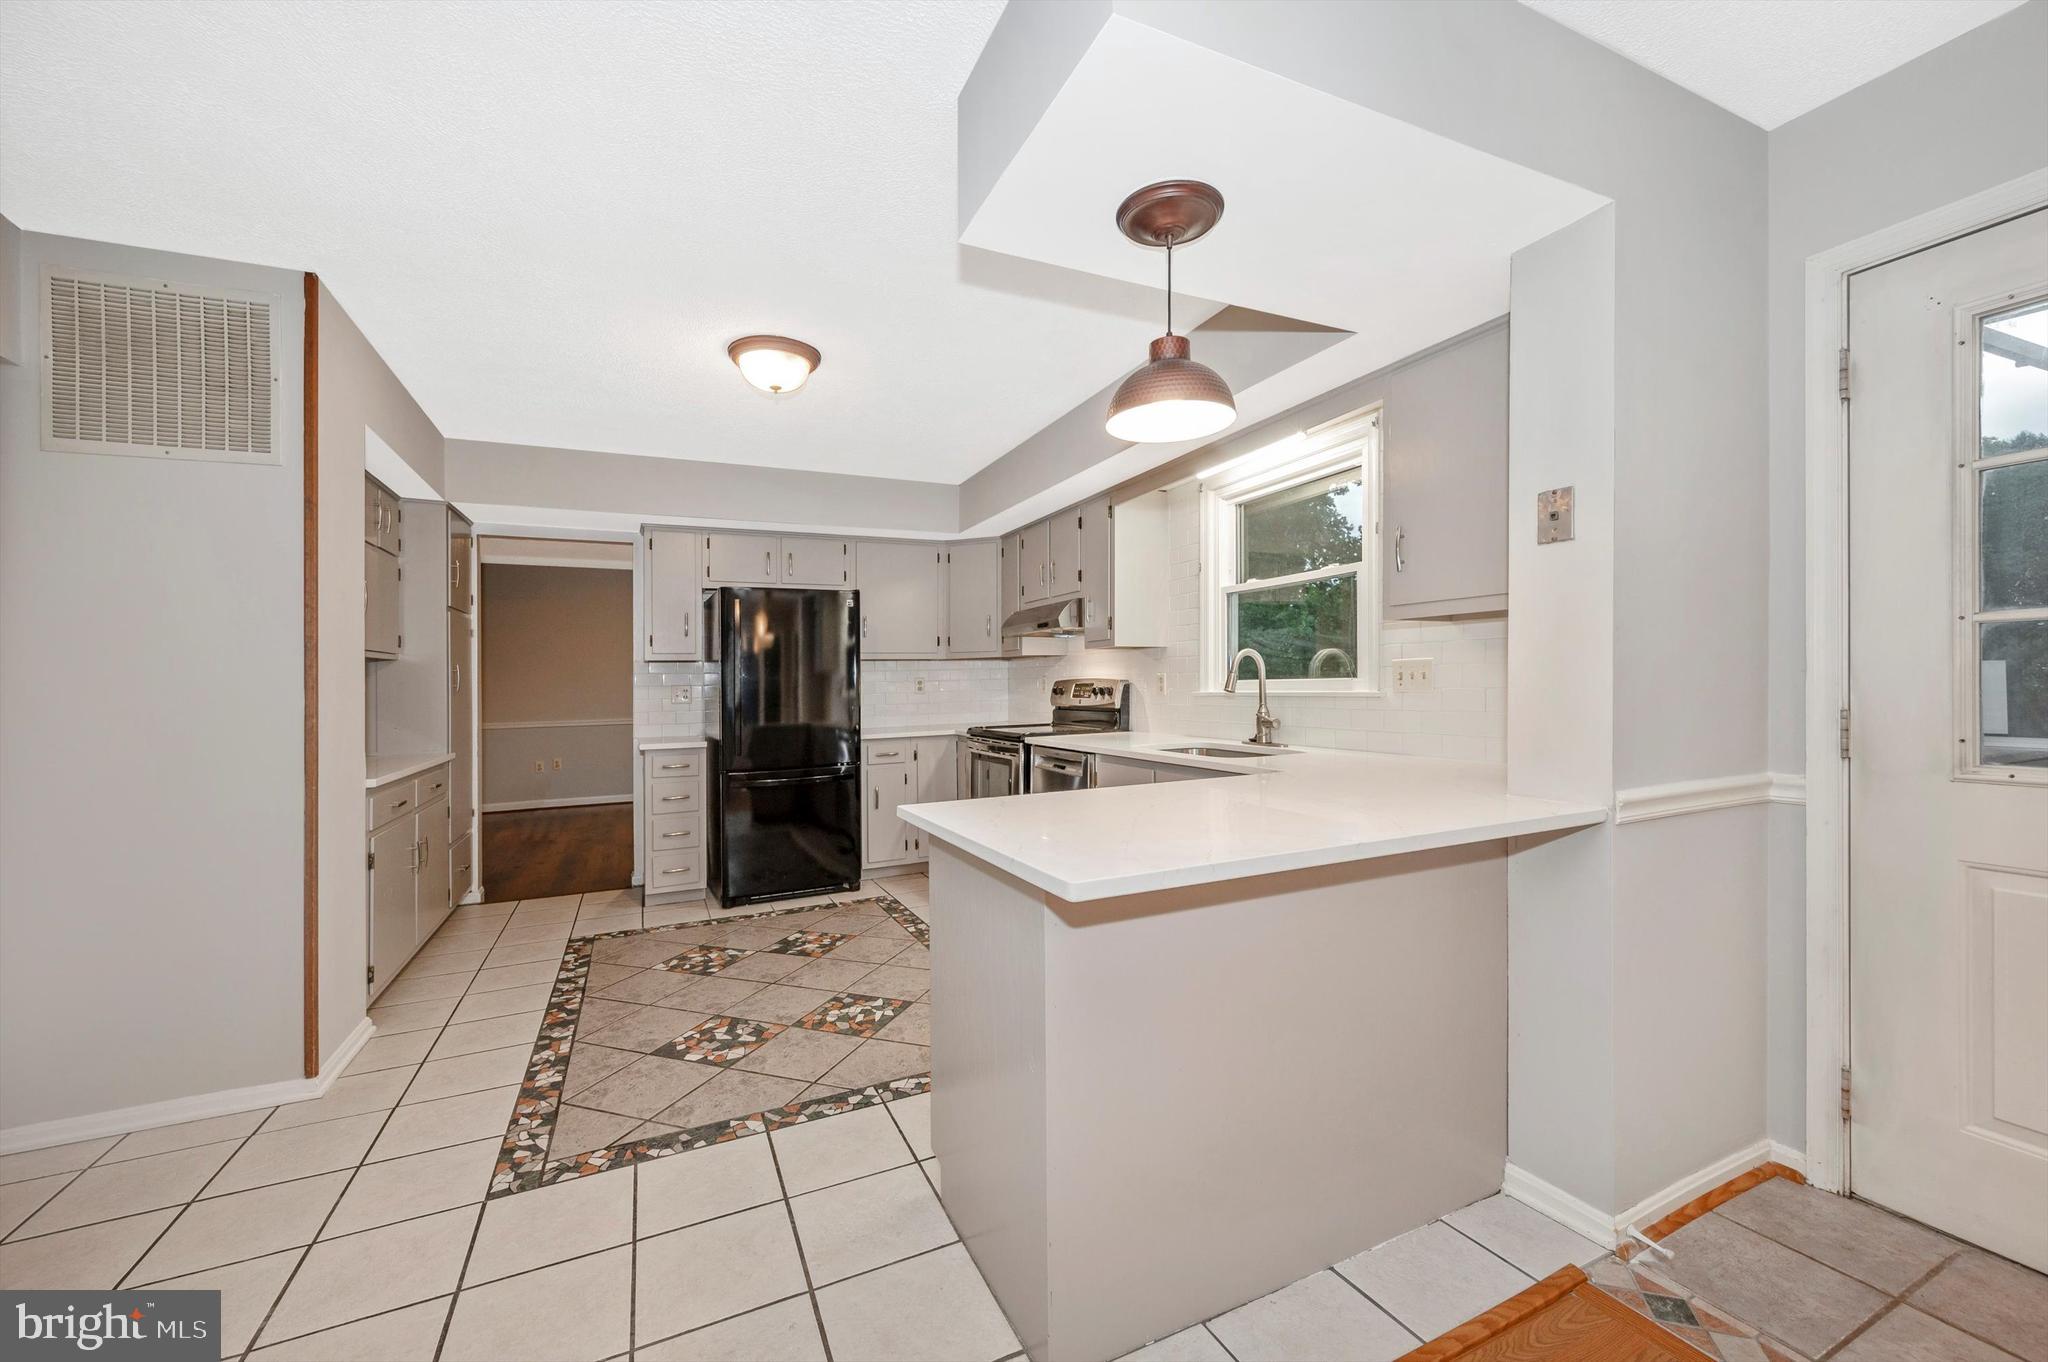 a kitchen with stainless steel appliances kitchen island granite countertop a refrigerator and a sink